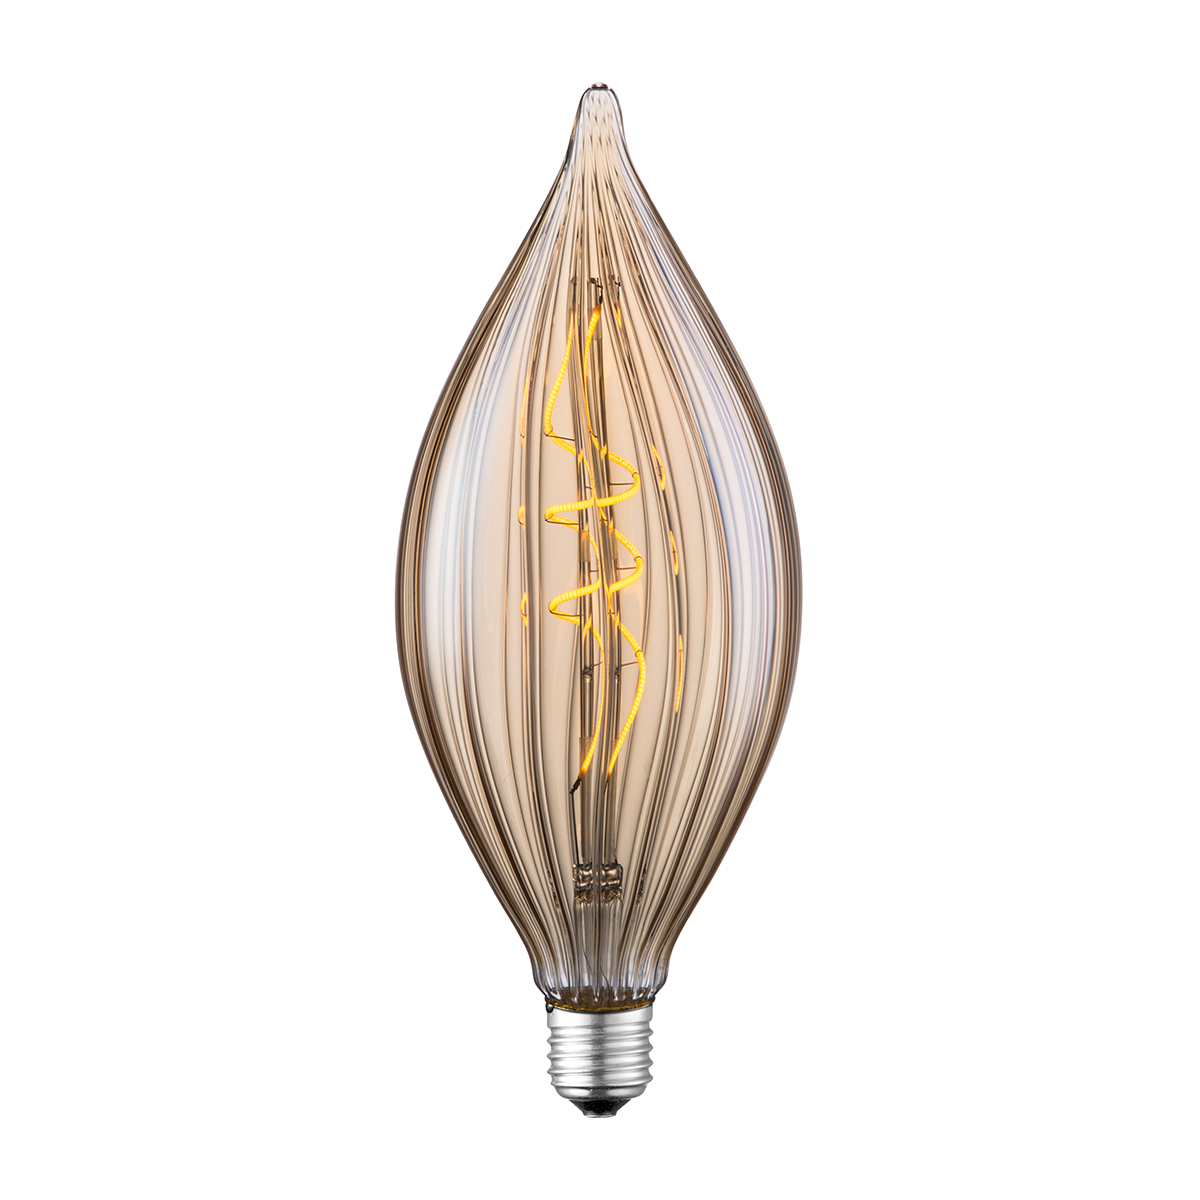 Tangla lighting - TLB-8110-04AM - LED Light Bulb Single Spiral filament - special 4W amber - seed - dimmable - E27